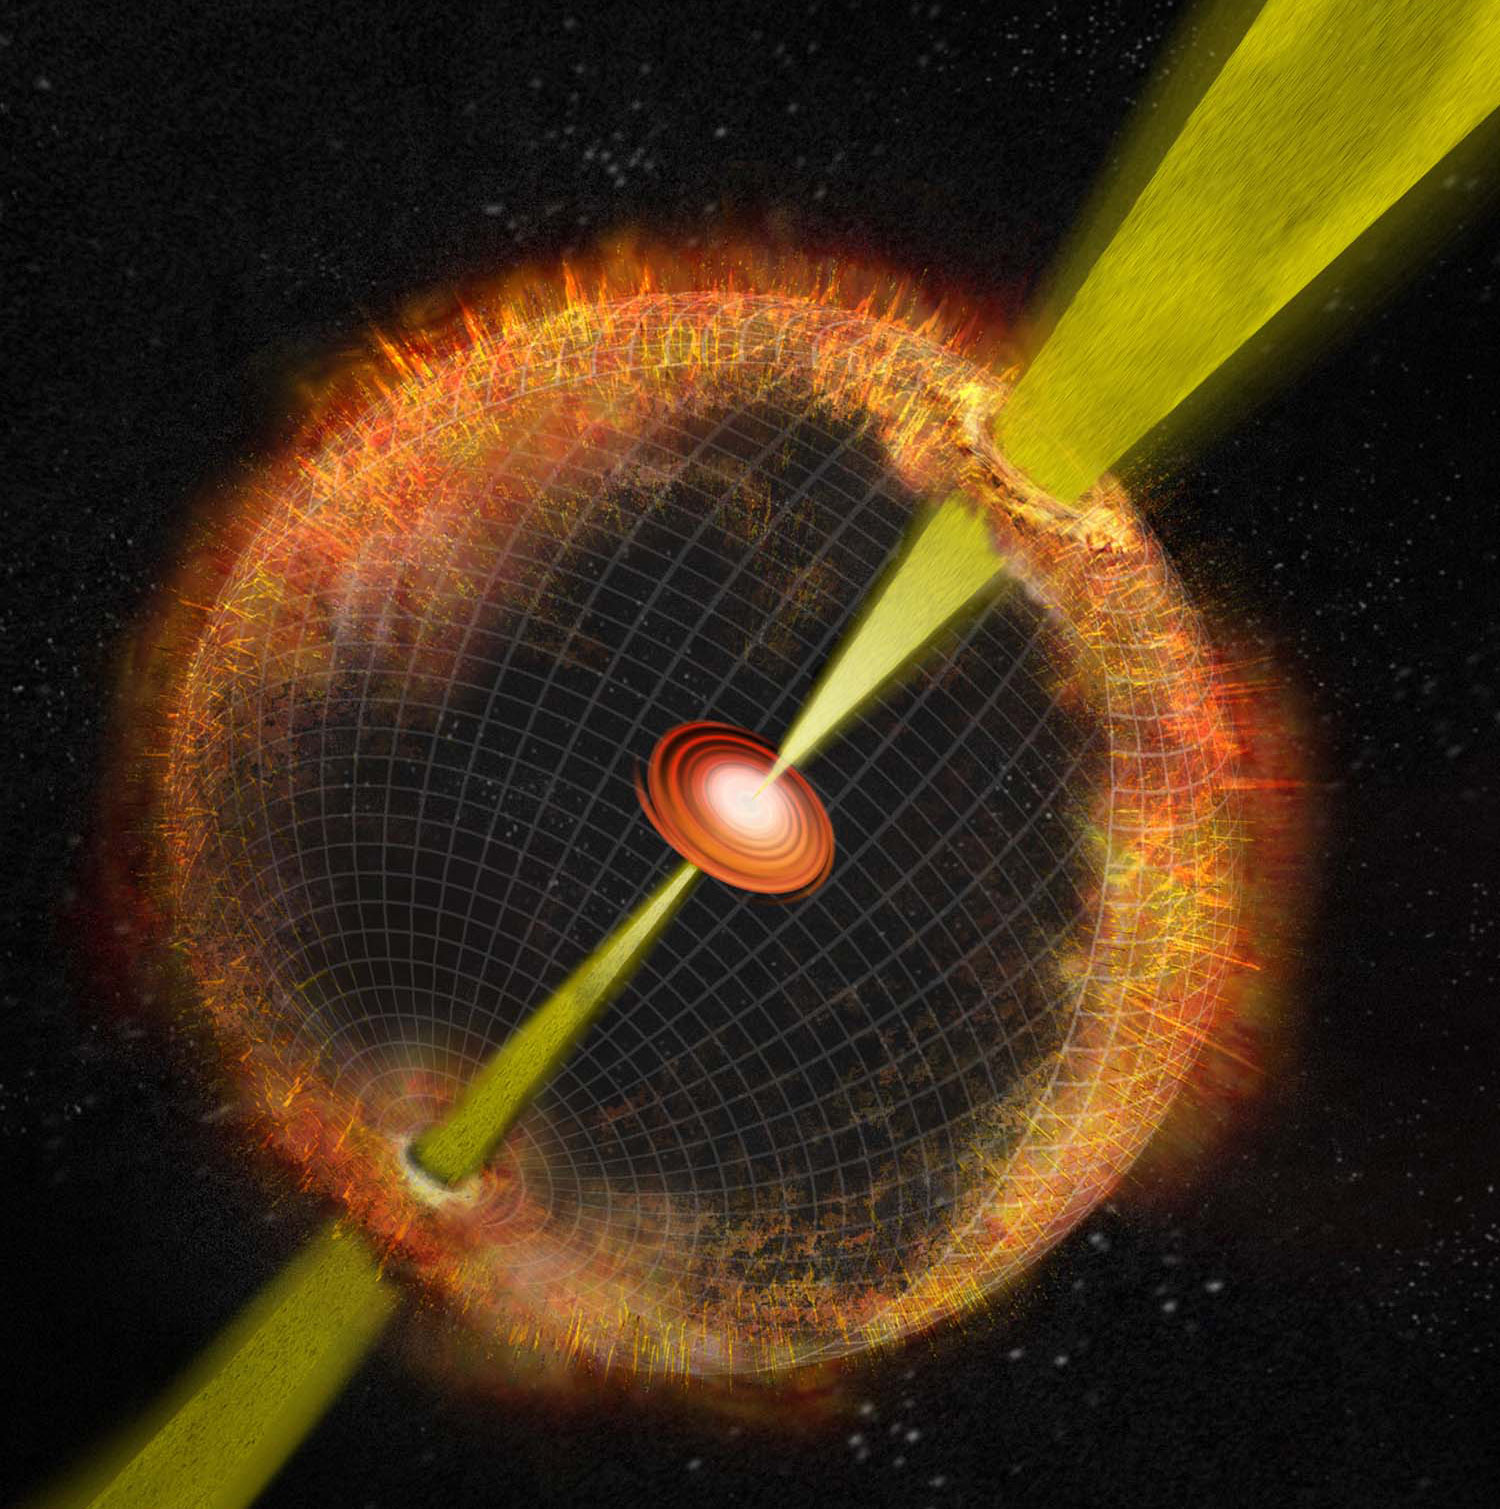 Seen here is an artist's conception of an unusual kind of supernova that Soderberg has explored. Known as an engine-driven supernova, it emits low-energy radio waves rather than high-energy gamma rays. Illustration by Bill Saxton.